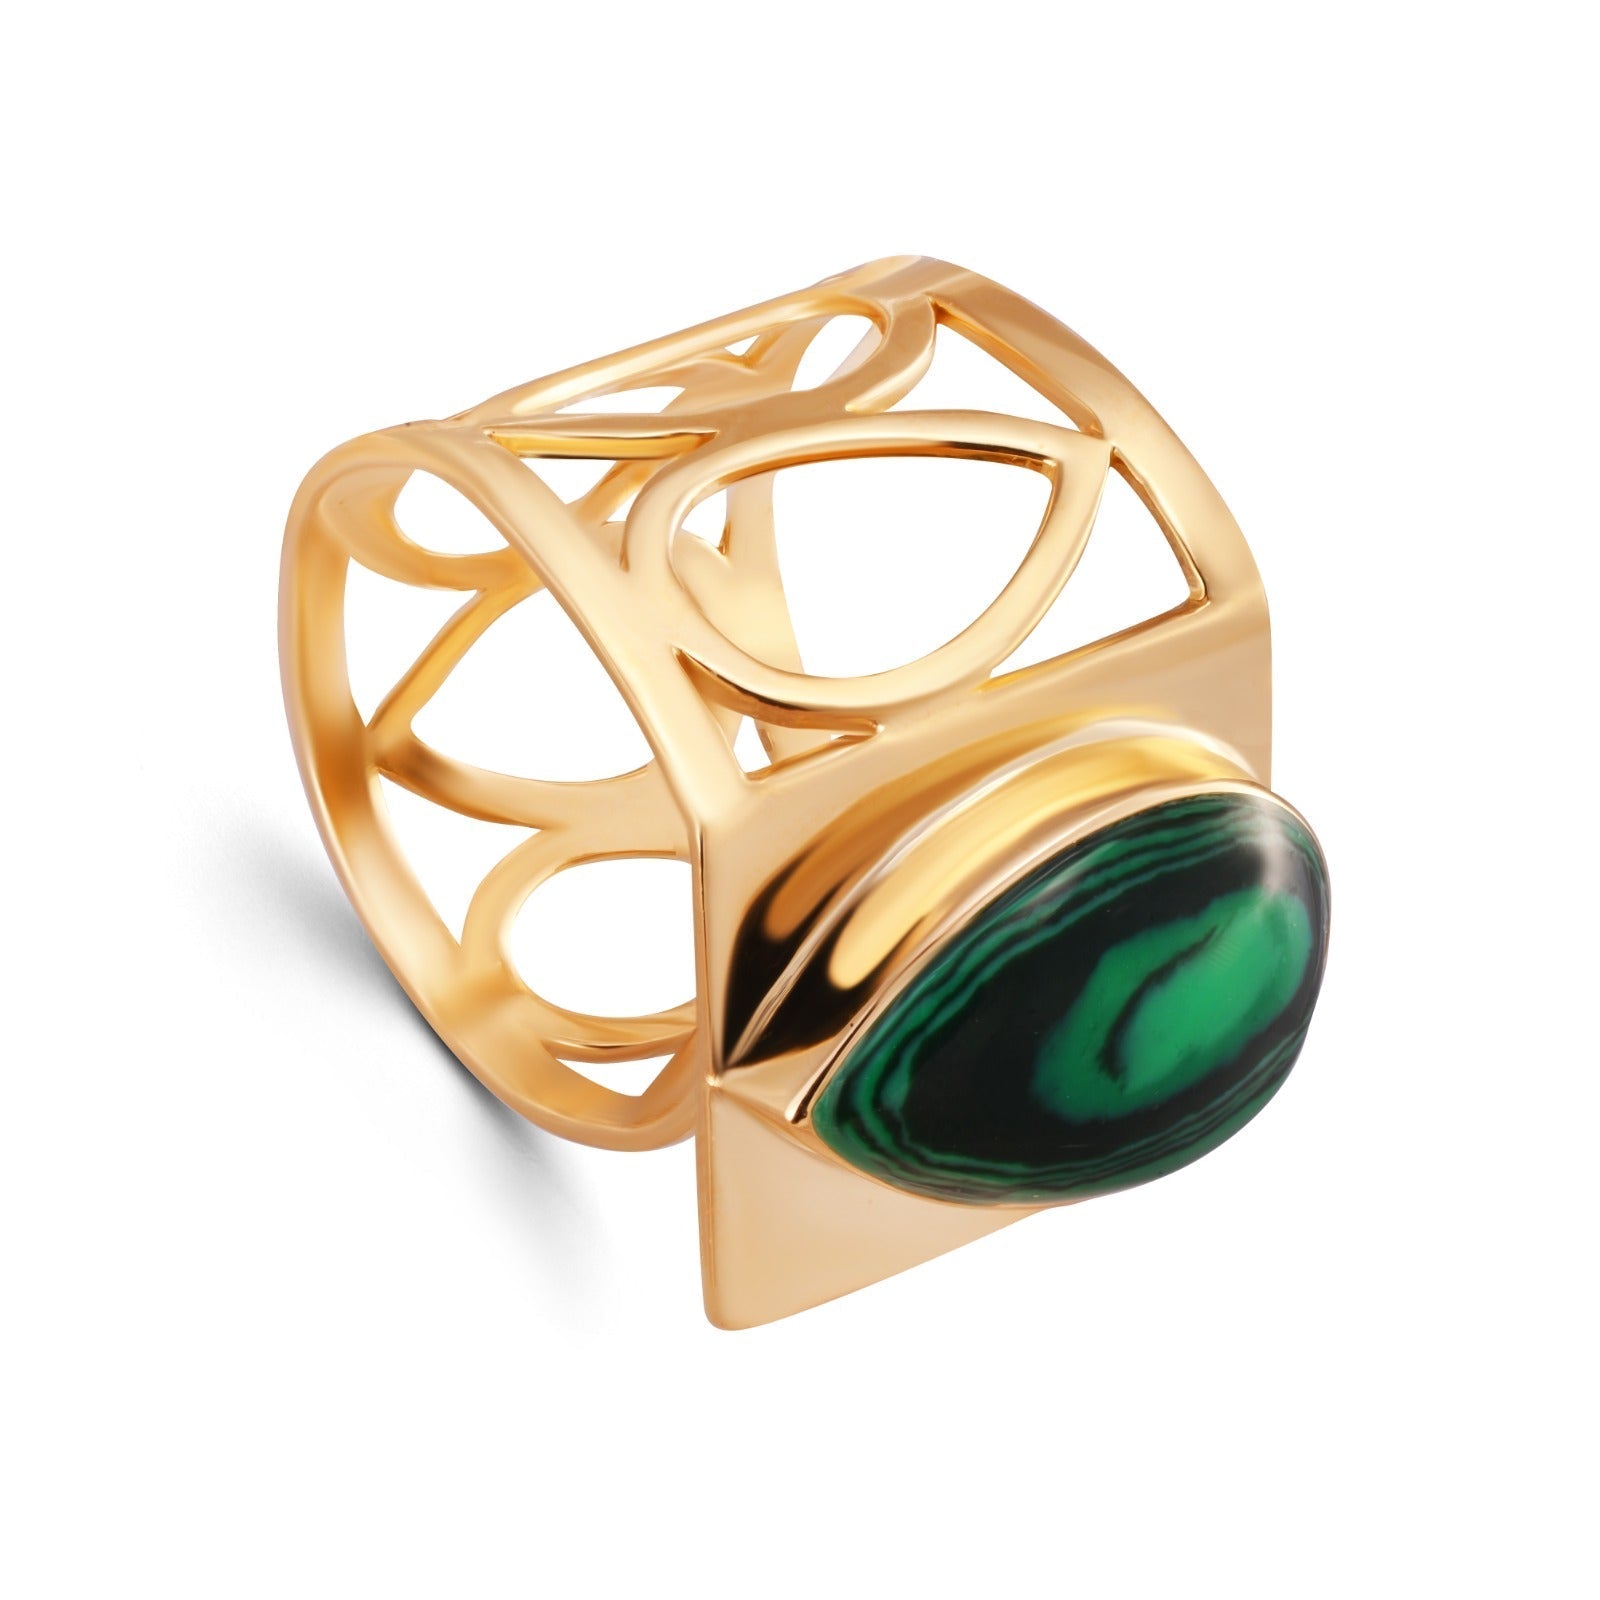 Very Unique Pear shaped Ring with a Malachite Stone in 18K Yellow gold / J-R015B